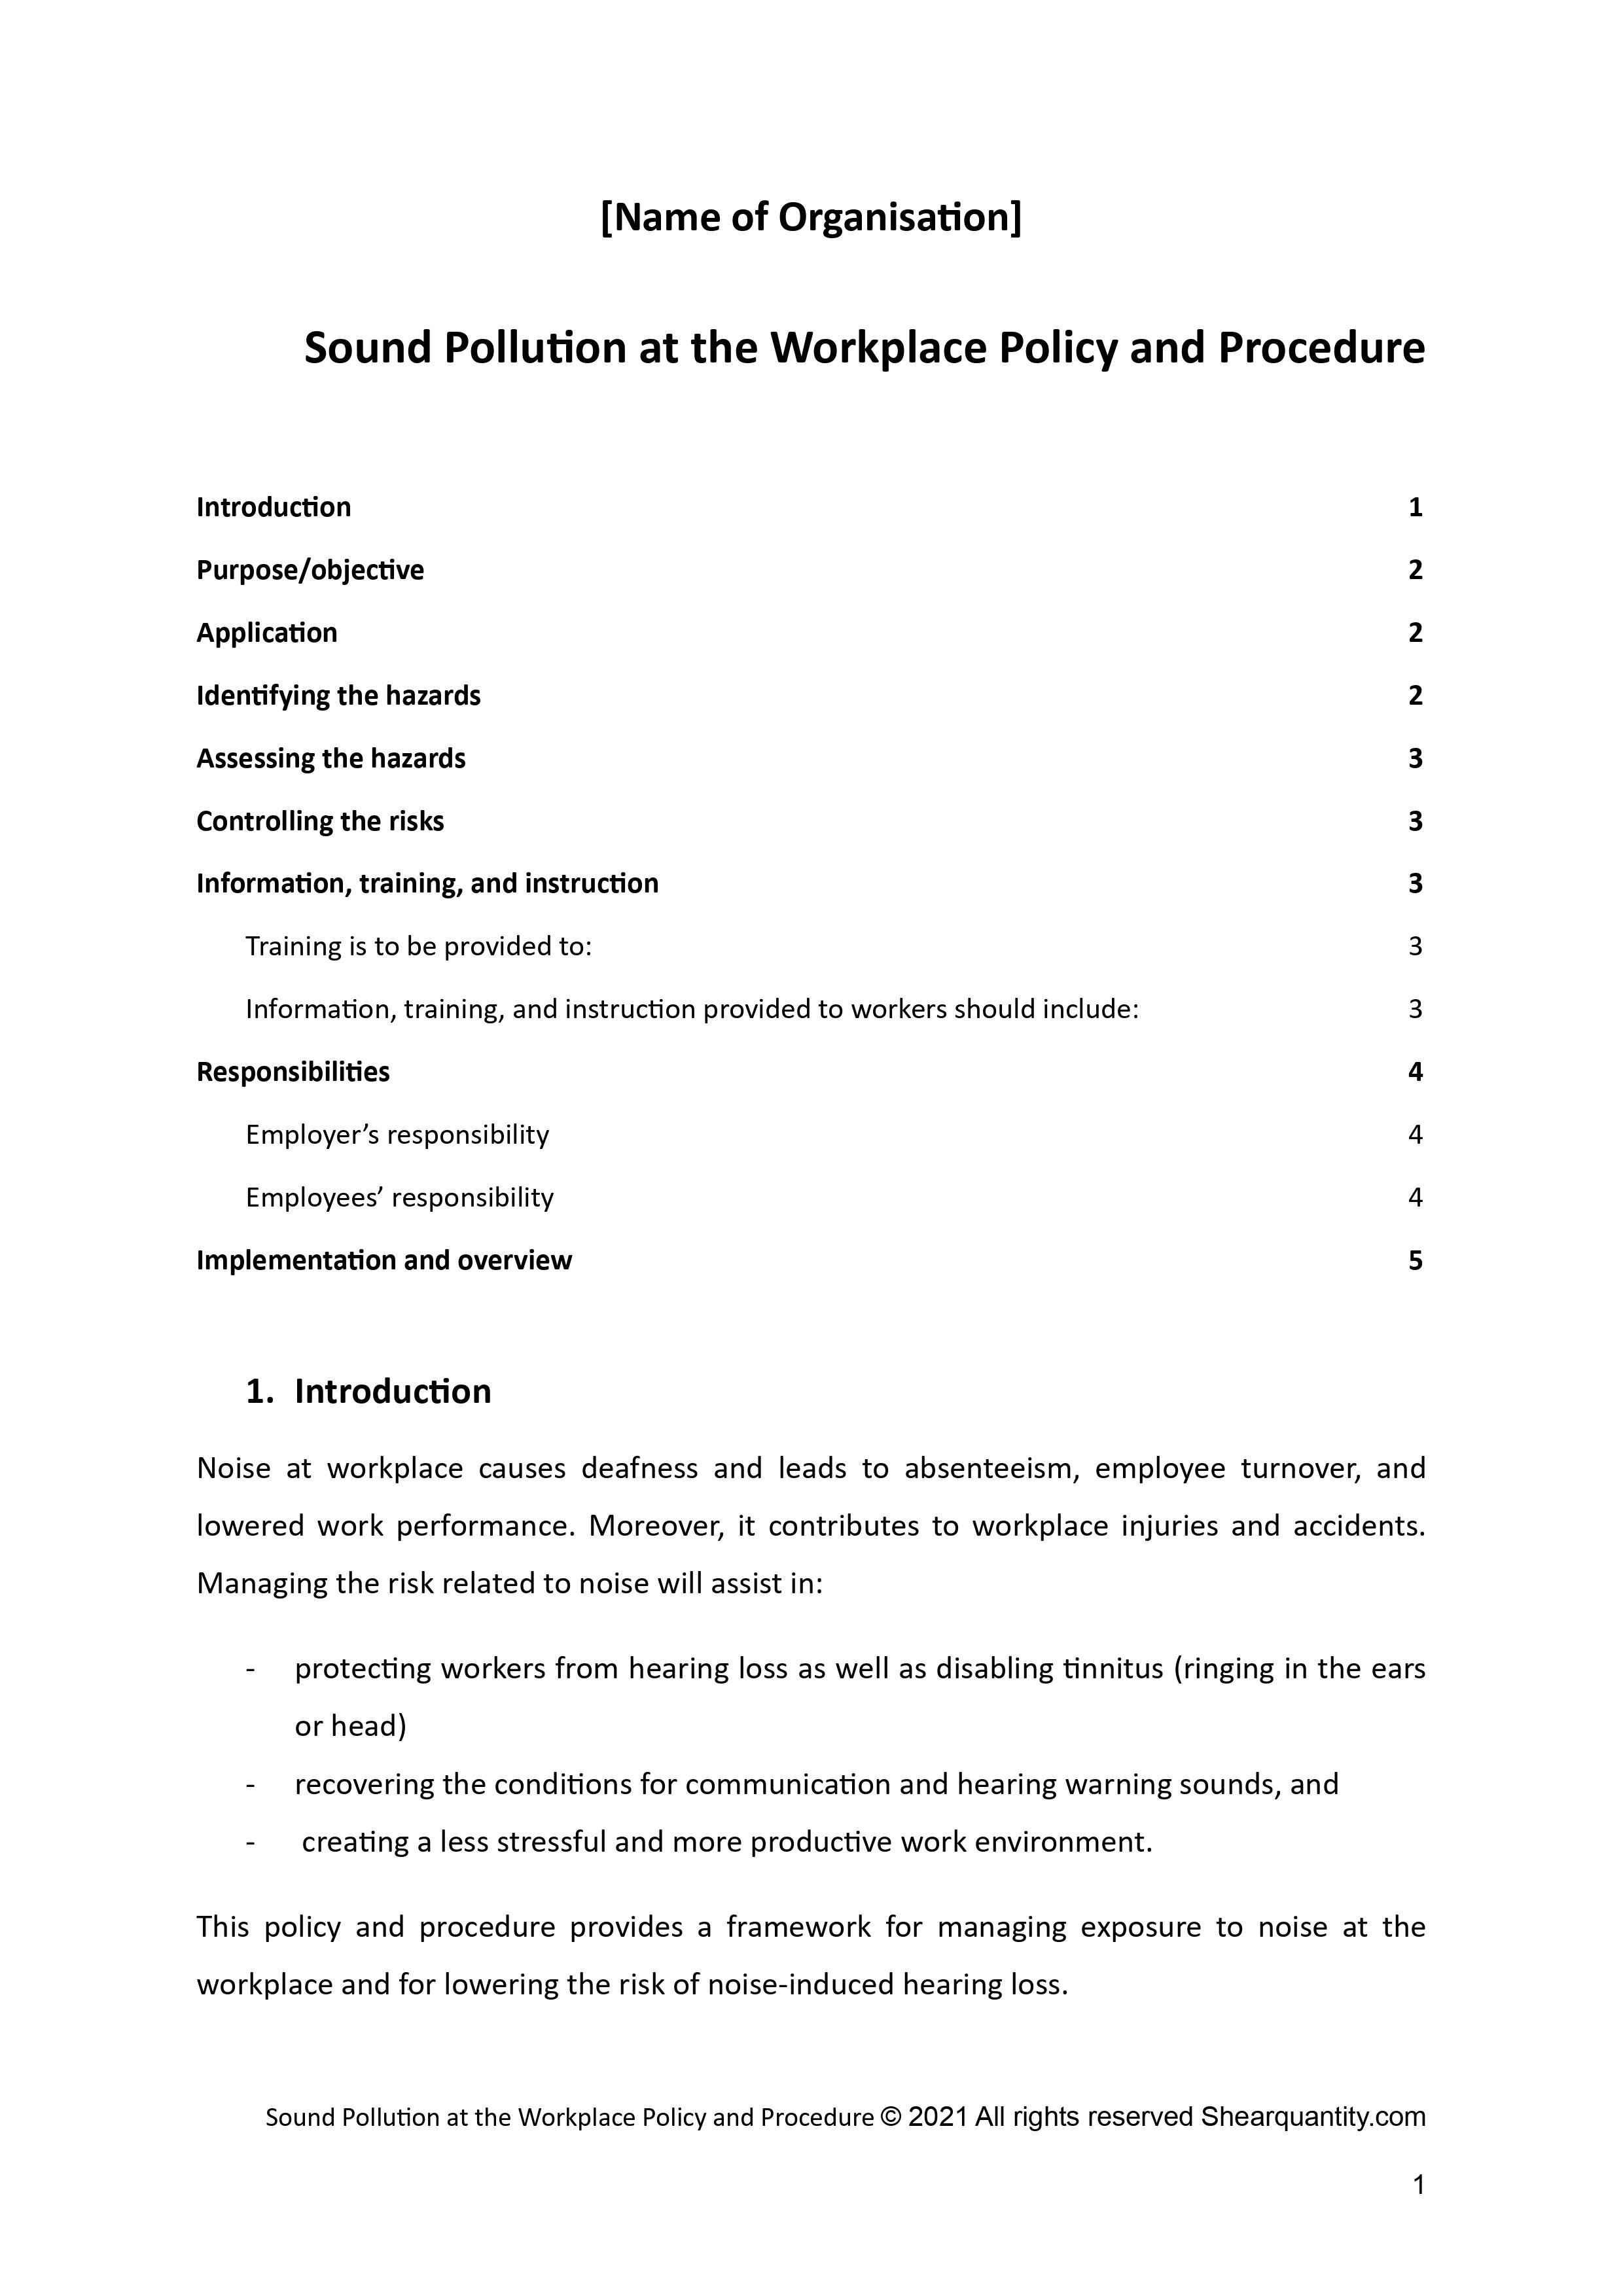 Sound Pollution at the Workplace Policy and Procedure